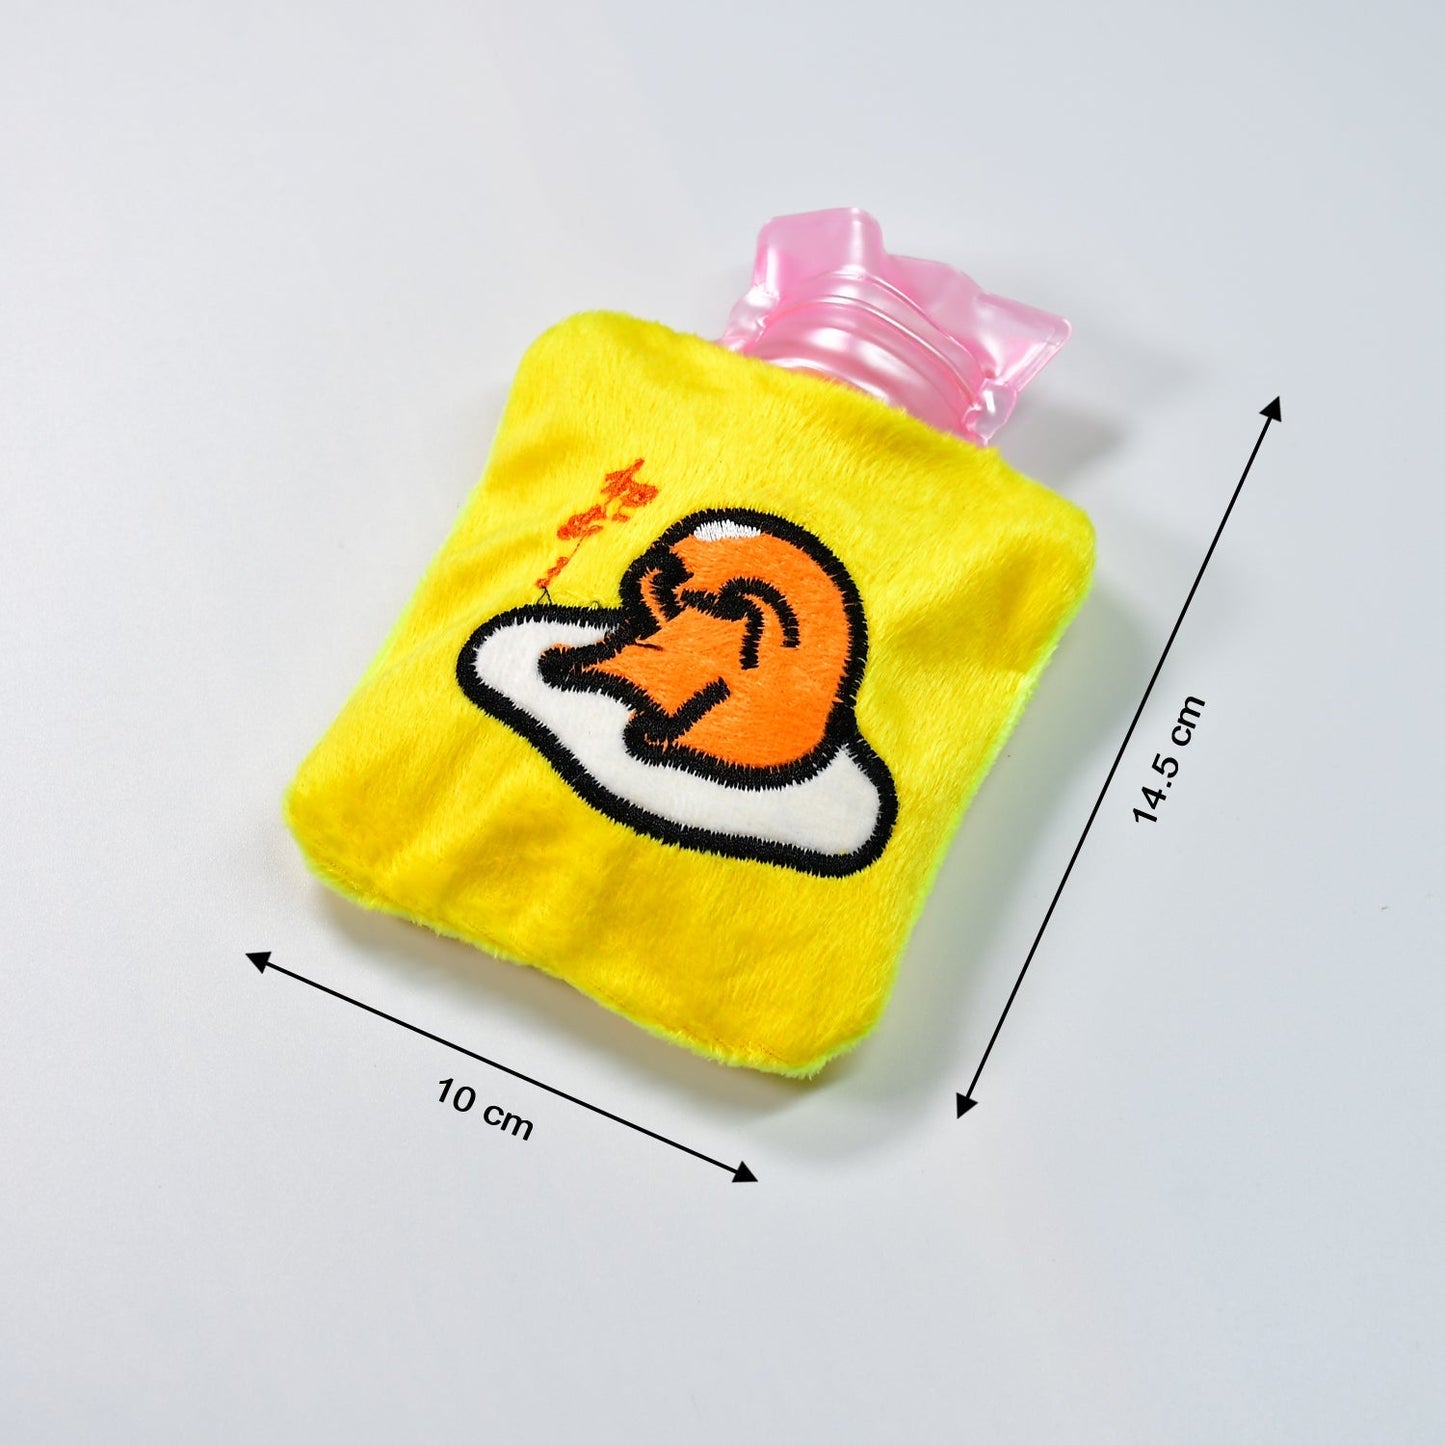 Yellow Duck Head Small Hot Water Bag with Cover for Pain Relief, Neck, Shoulder Pain and Hand, Feet Warmer, Menstrual Cramps